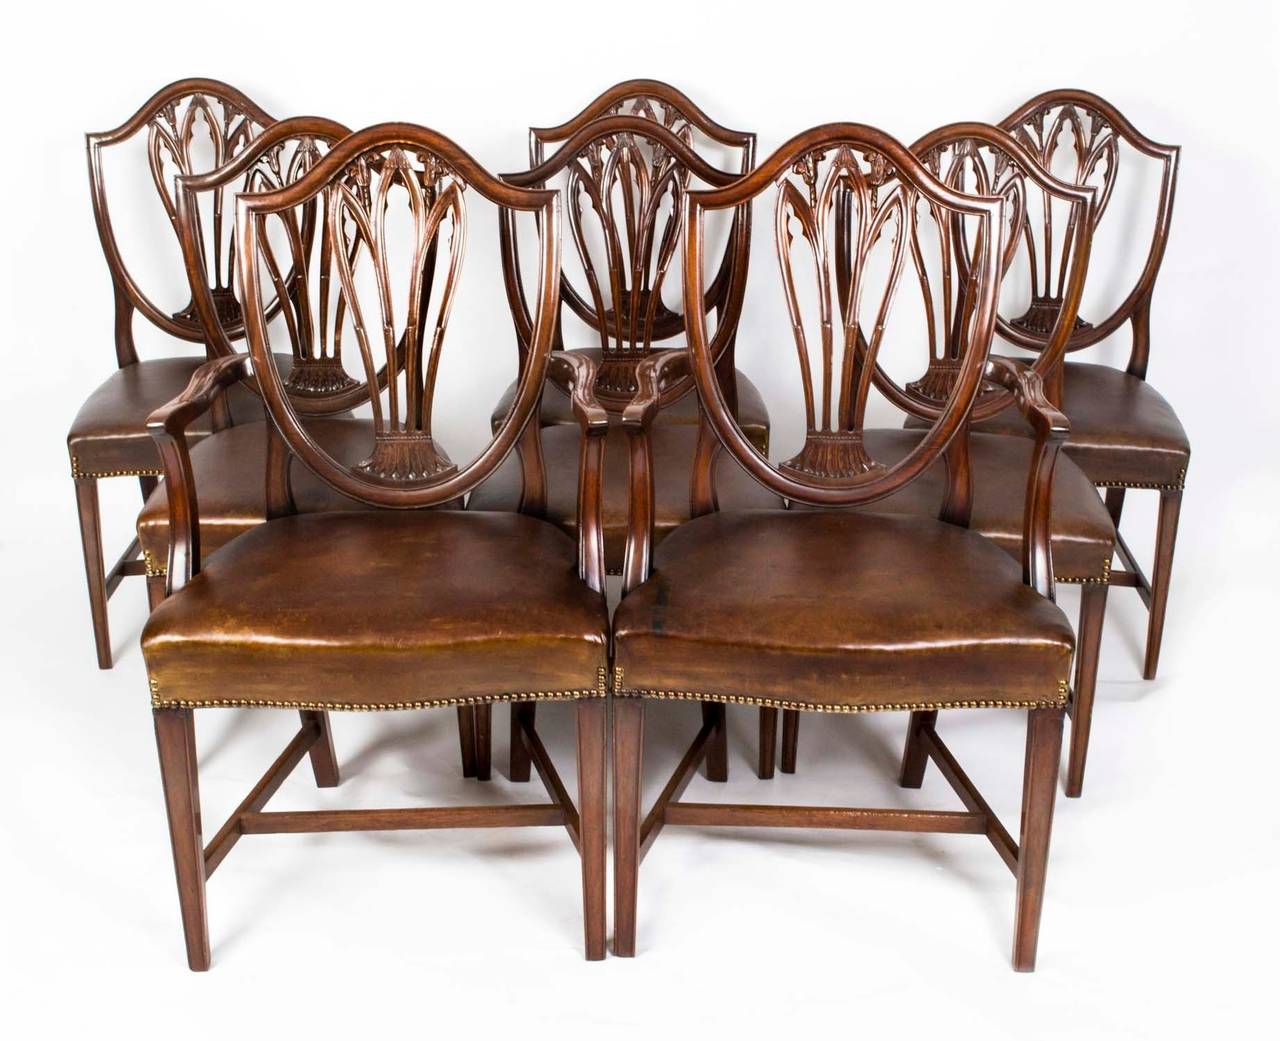 This is a fantastic antique English-made set of eight Hepplewhite style dining chairs circa 1900 in date. 

These chairs have been masterfully crafted in beautiful solid mahogany throughout and the finish and attention to detail on display are